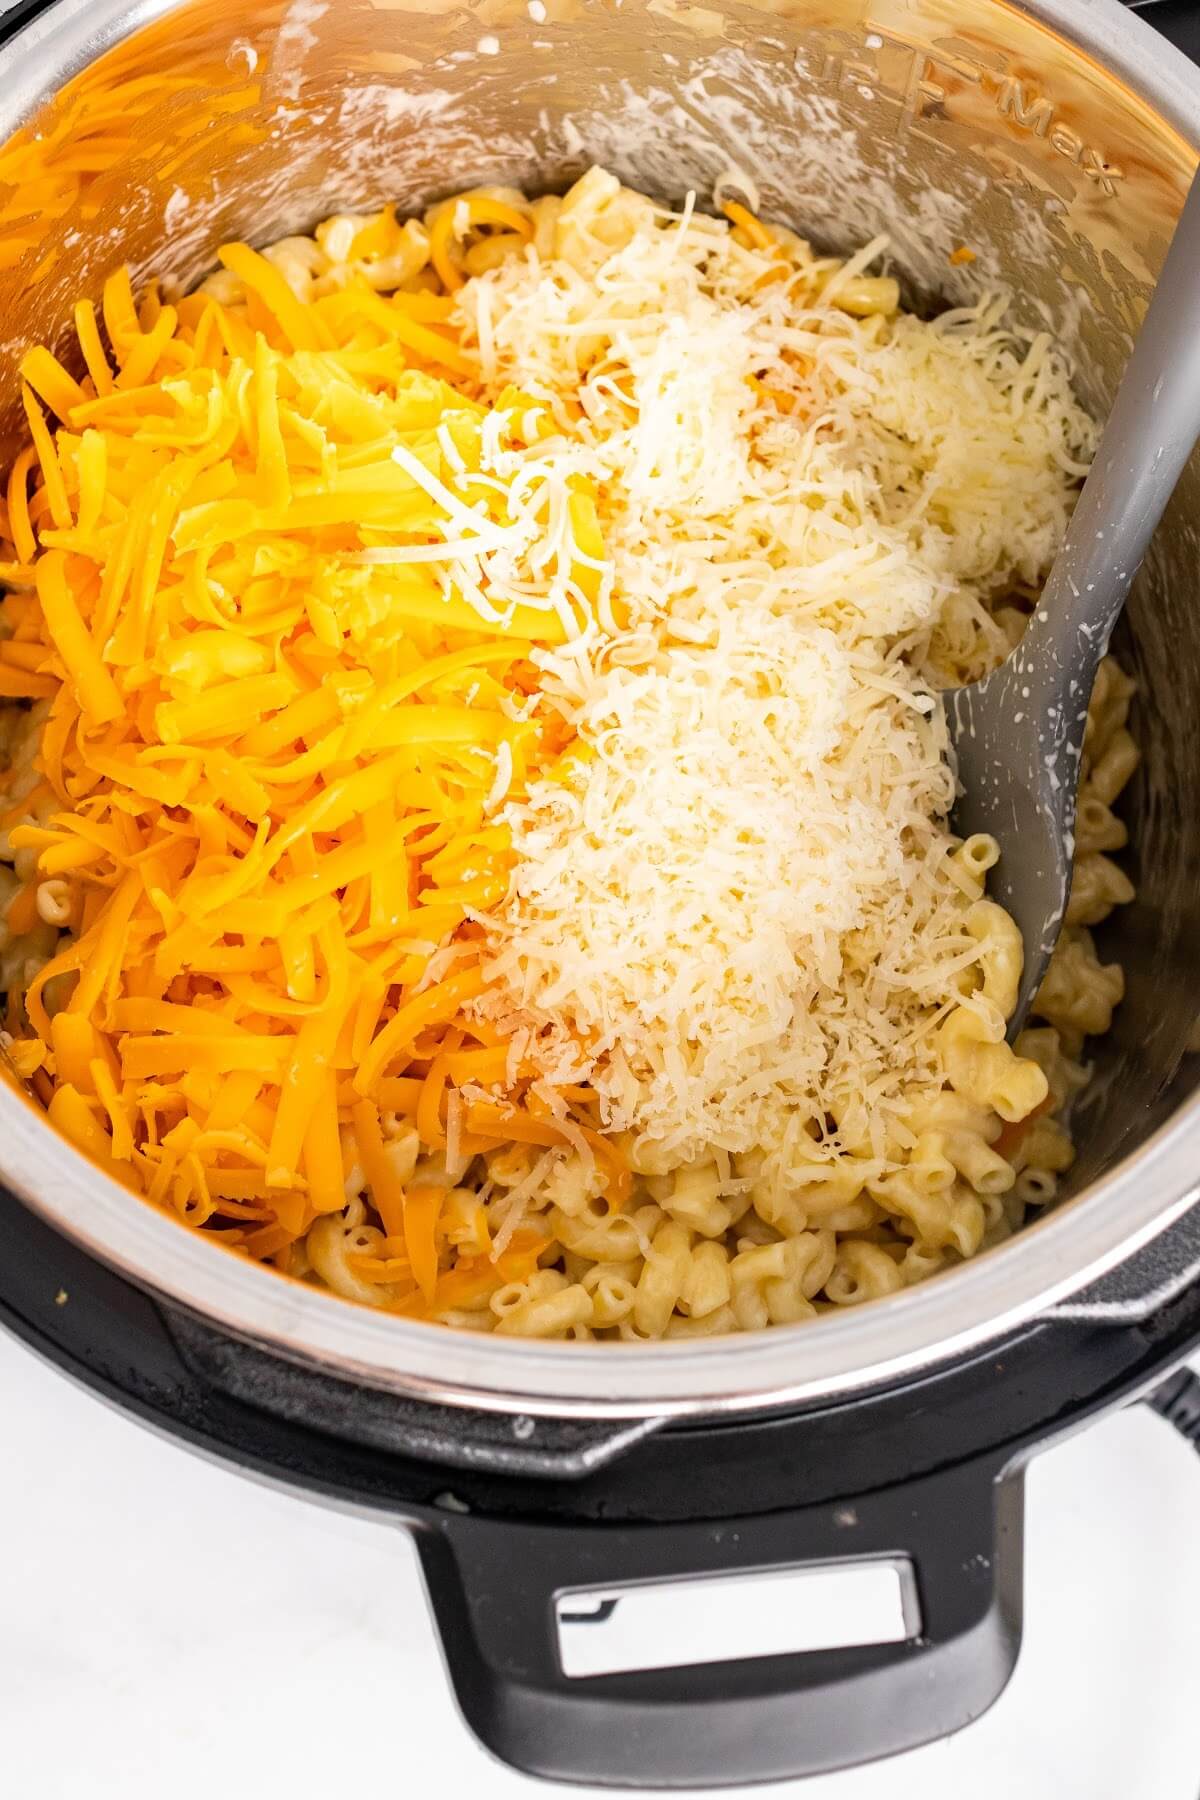 An Instant Pot filled with cooked macaroni pasta and topped with several kinds of shredded cheeses being stirred with a spatula.